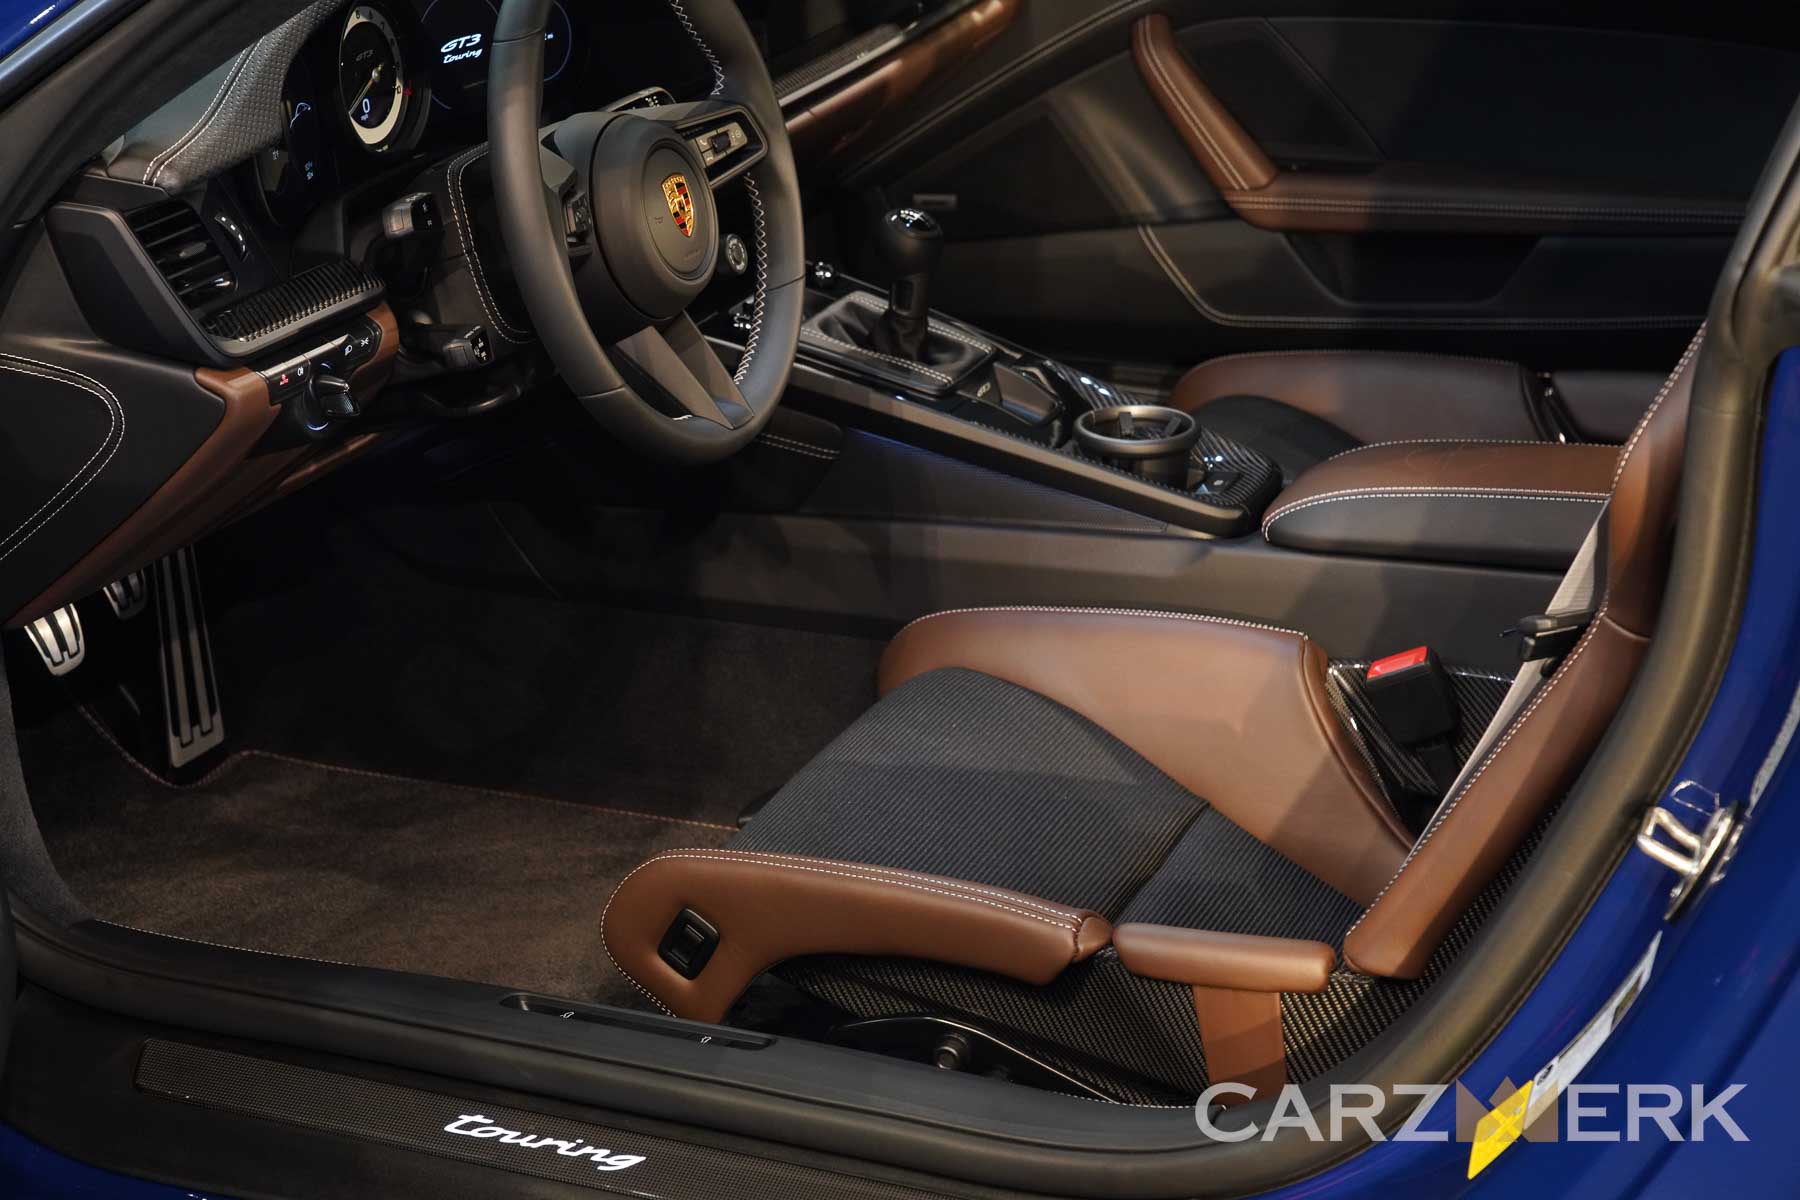 2023 Porsche 911 GT3 Touring PTS CXX Interior - Truffle Brown and Black Leather LWB Seat